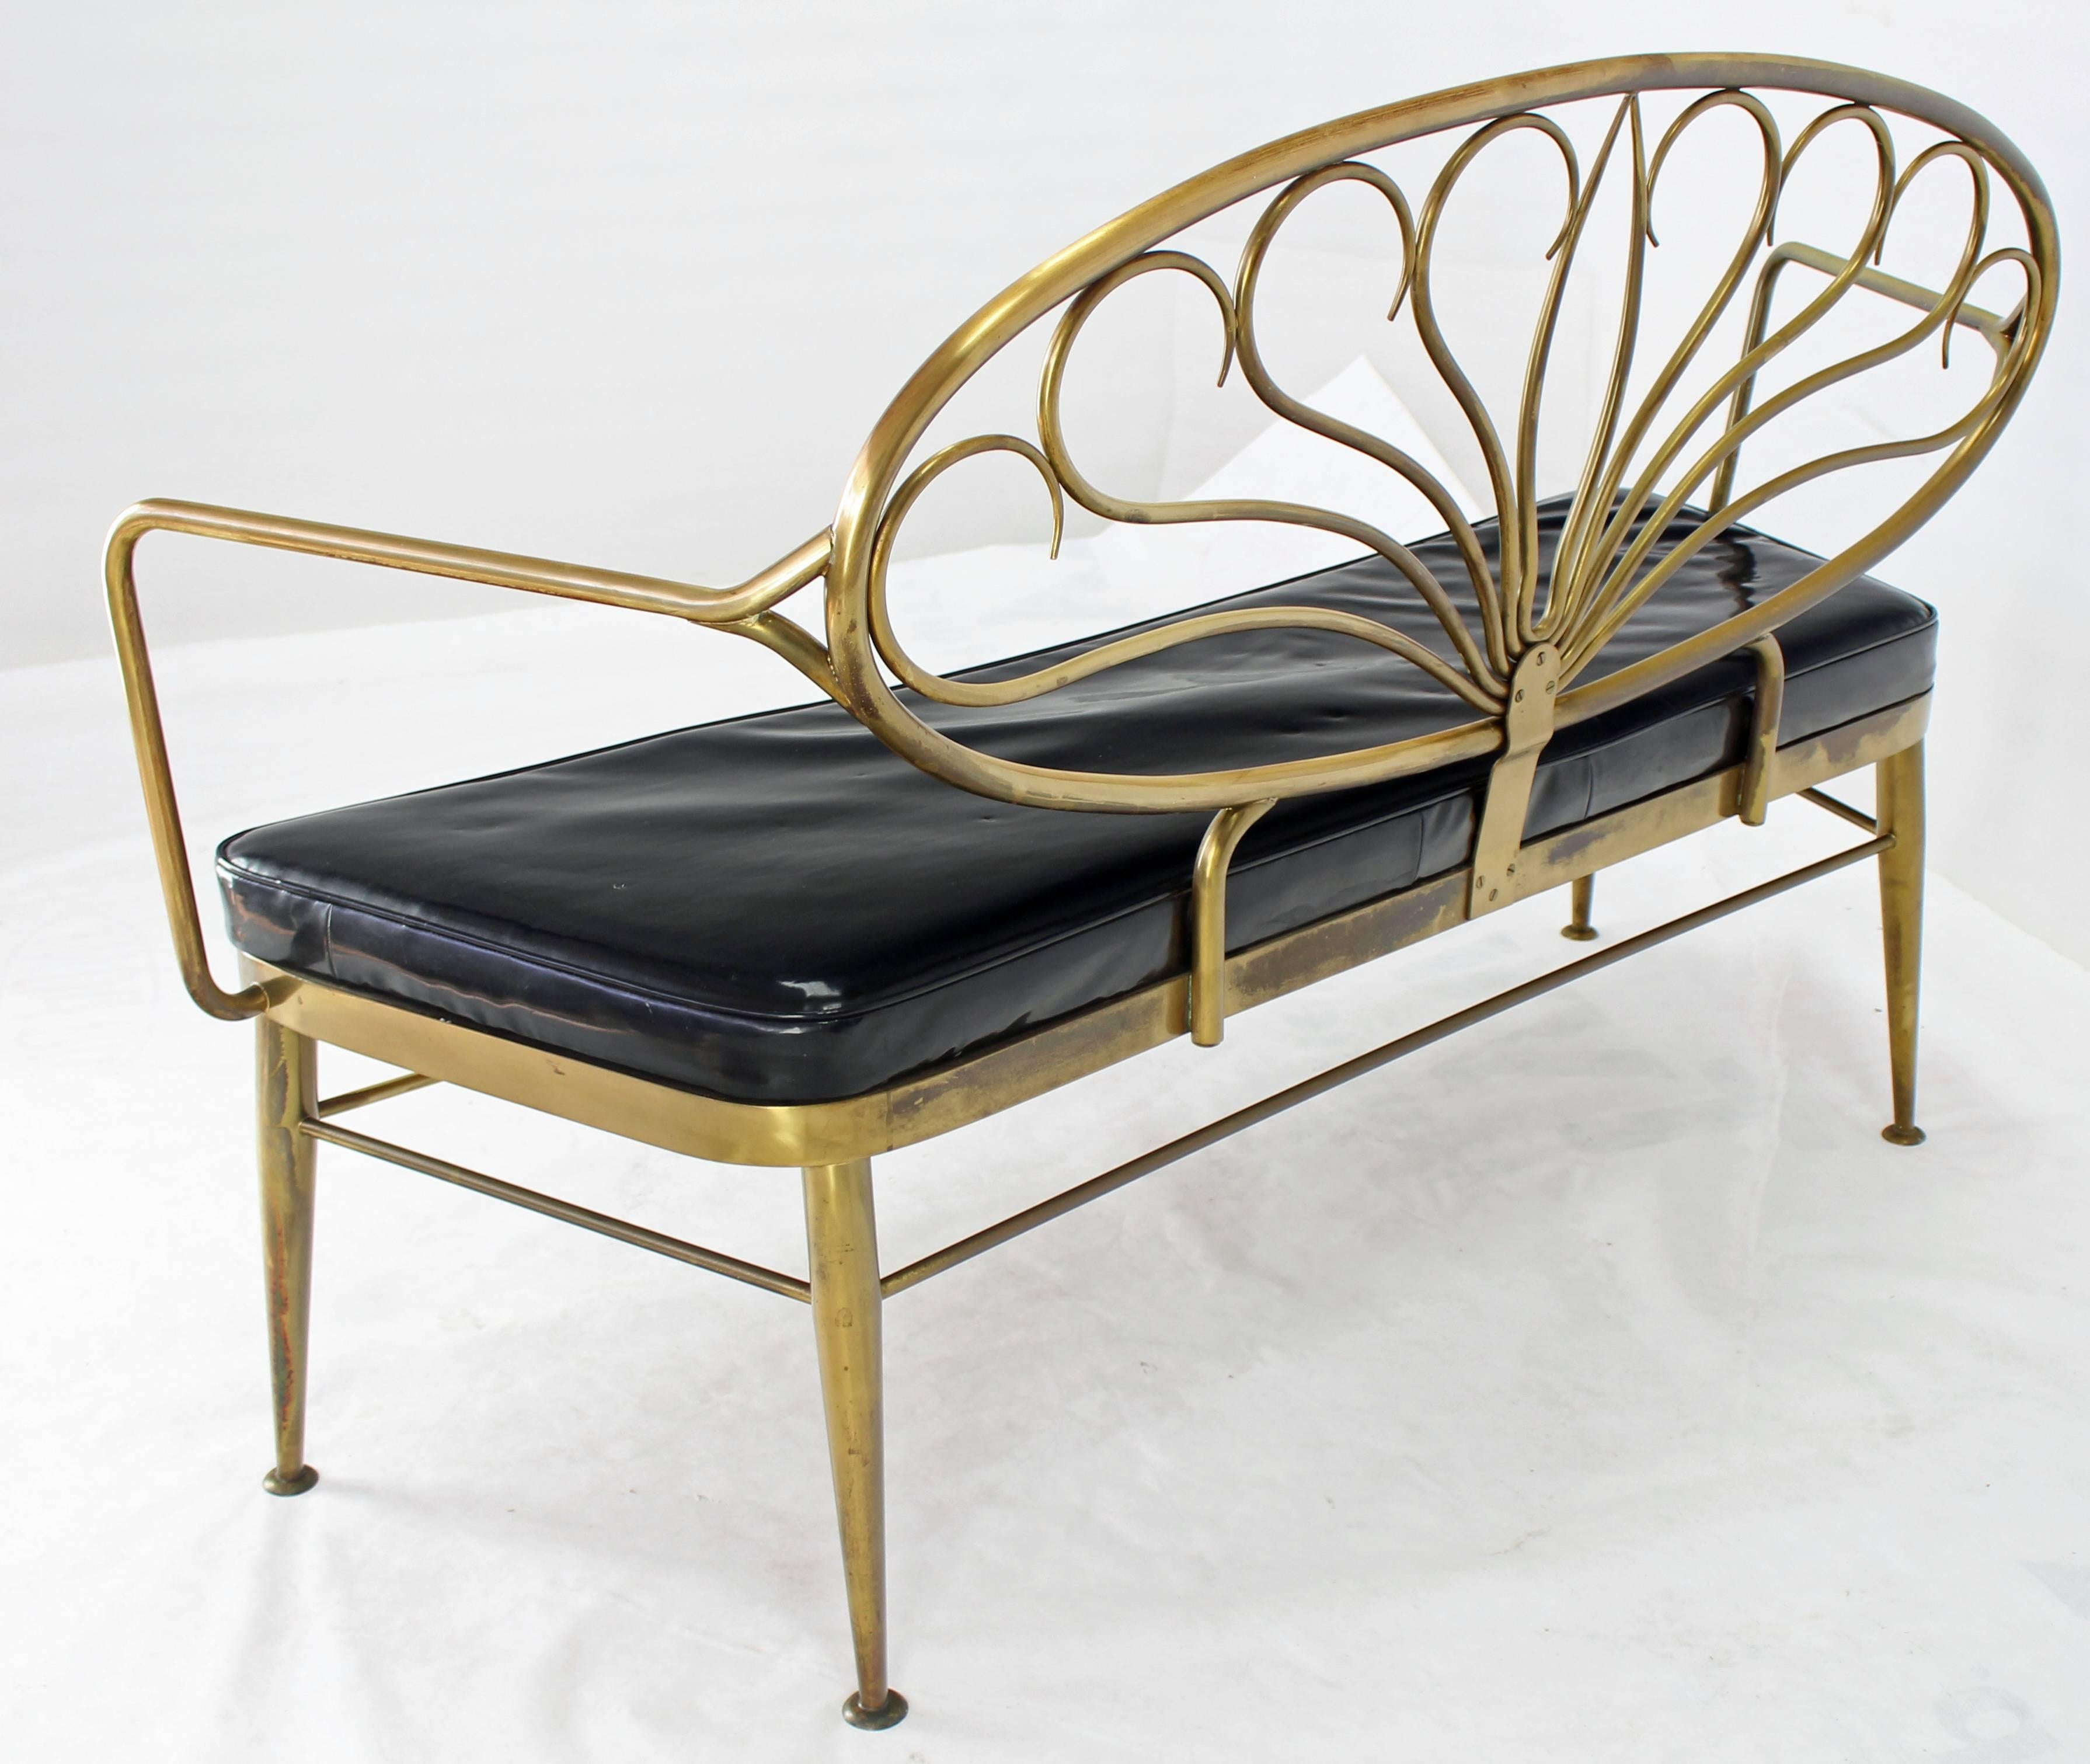 Solid Brass Scallop Back Mid-Century Loveseat Settee Bench For Sale 1